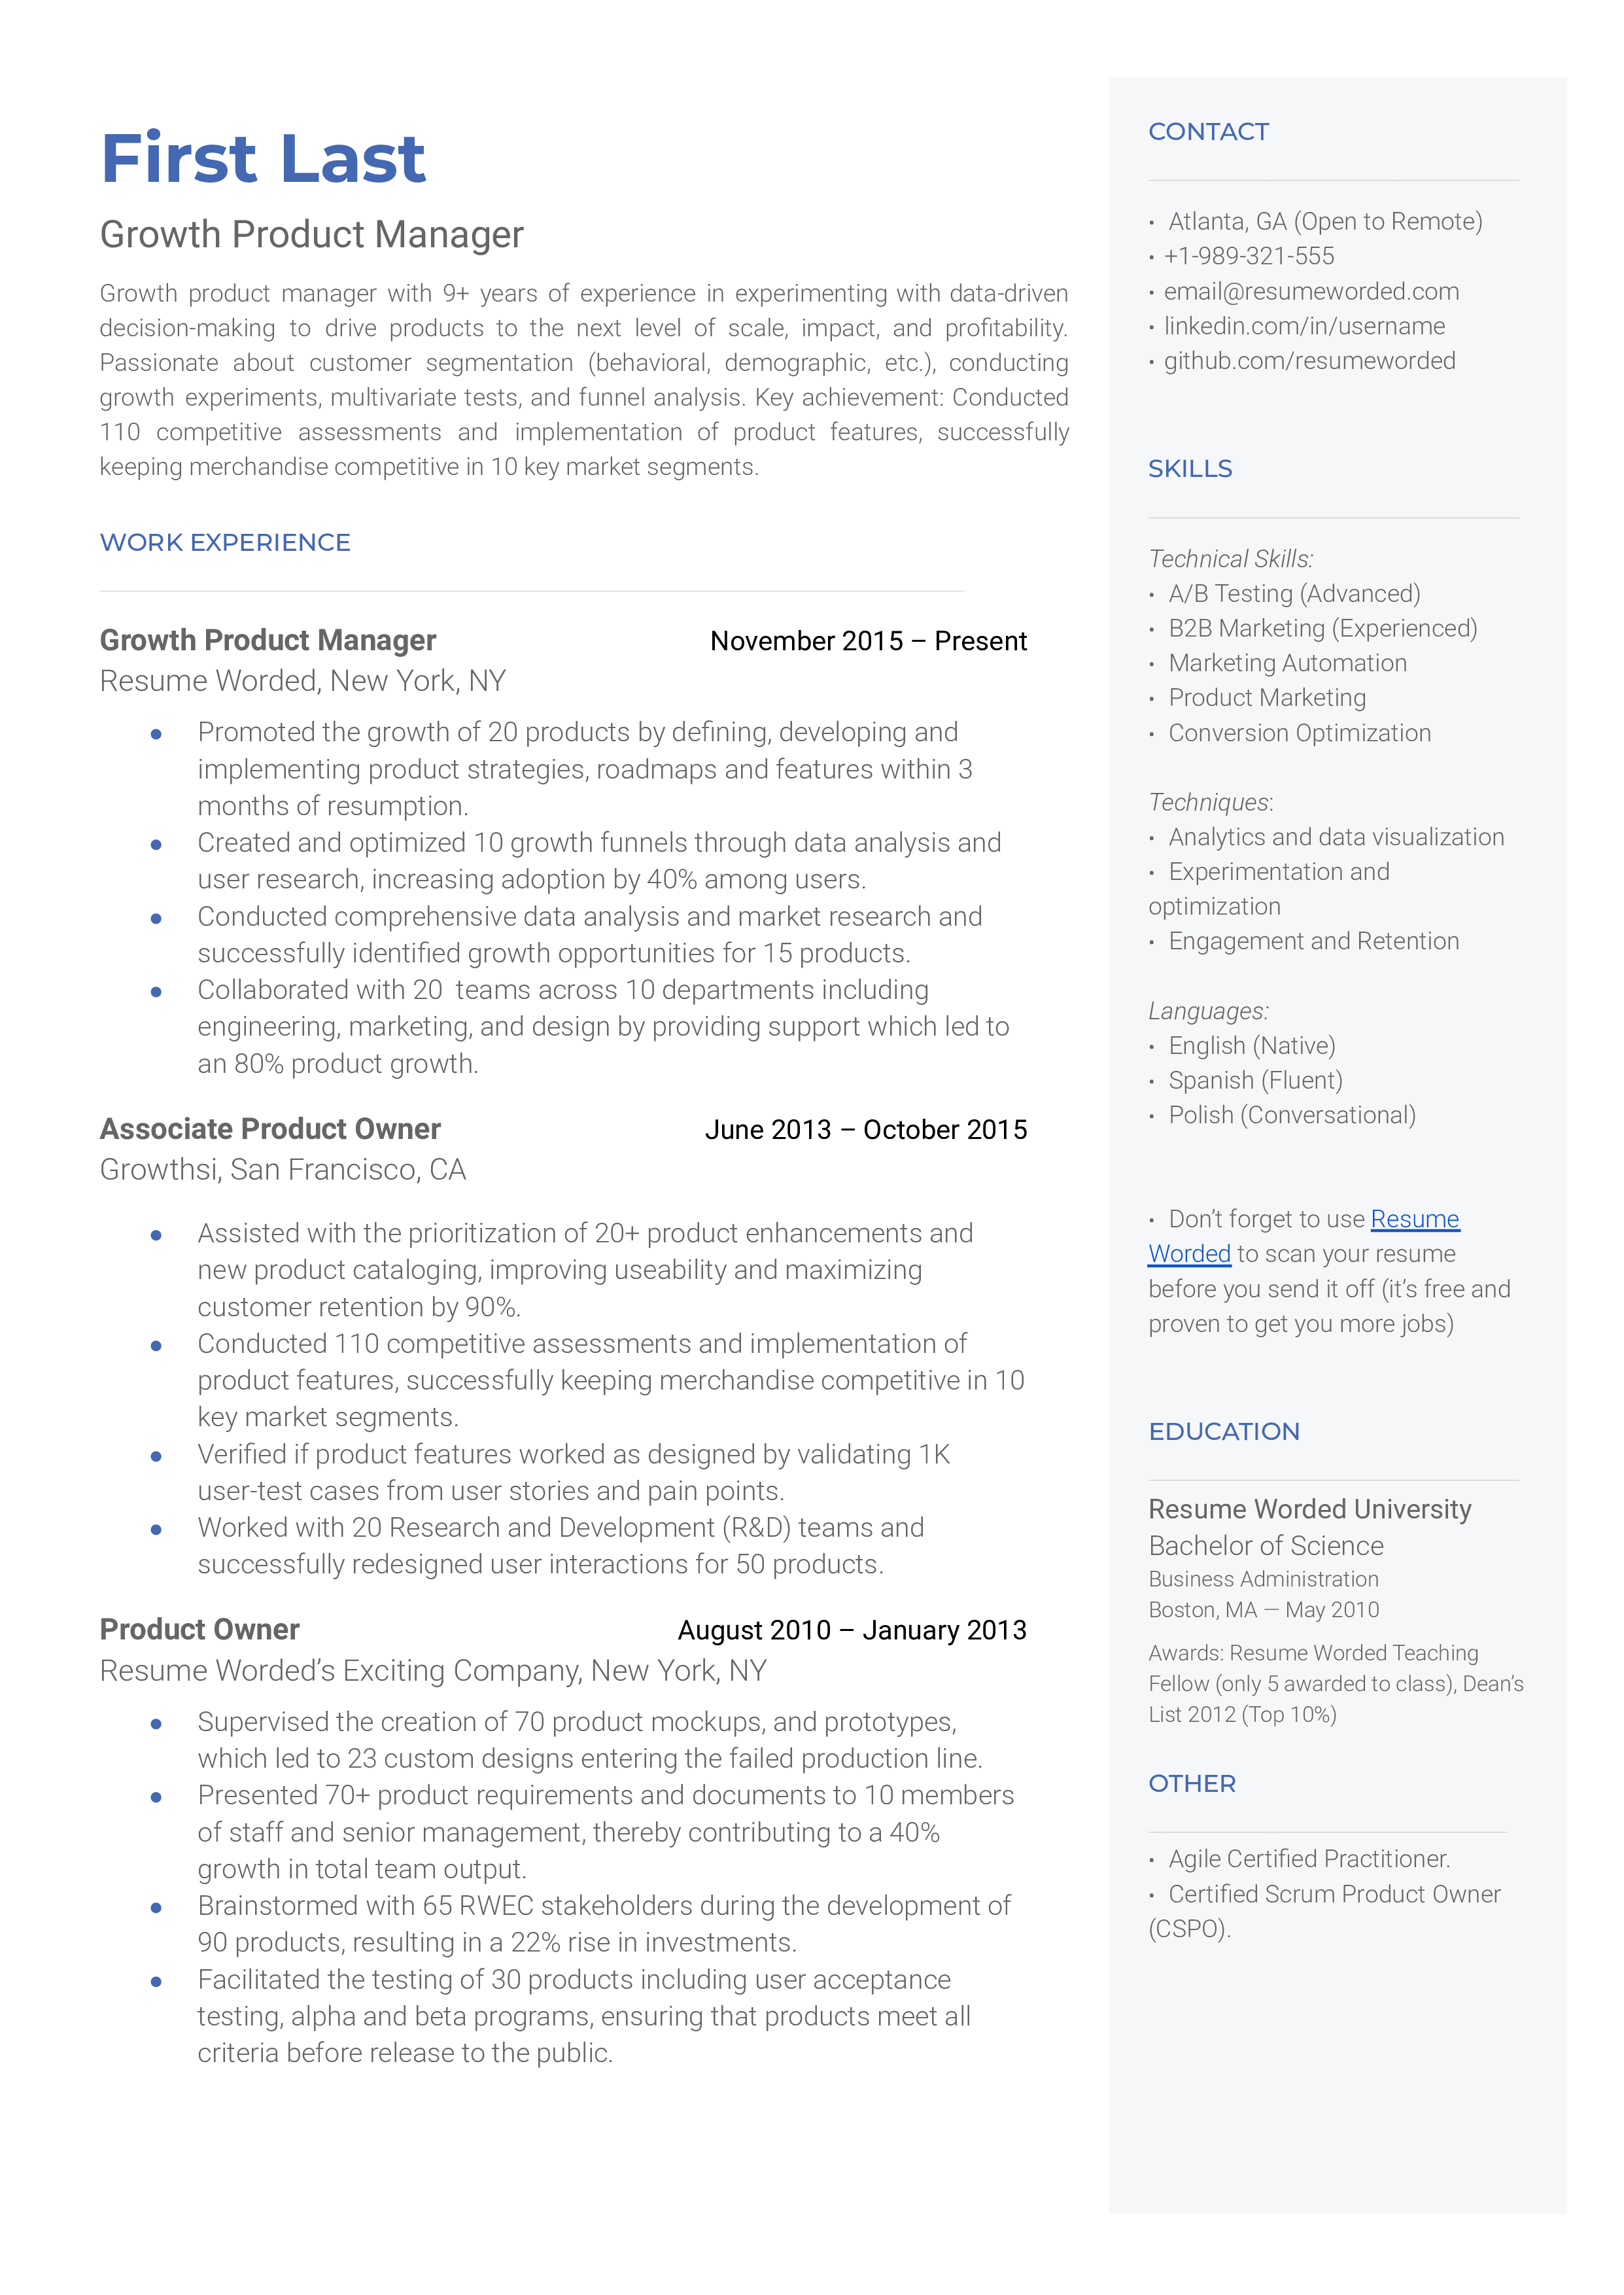 Growth product manager resume sample that highlights applicant's technical and communication skills.